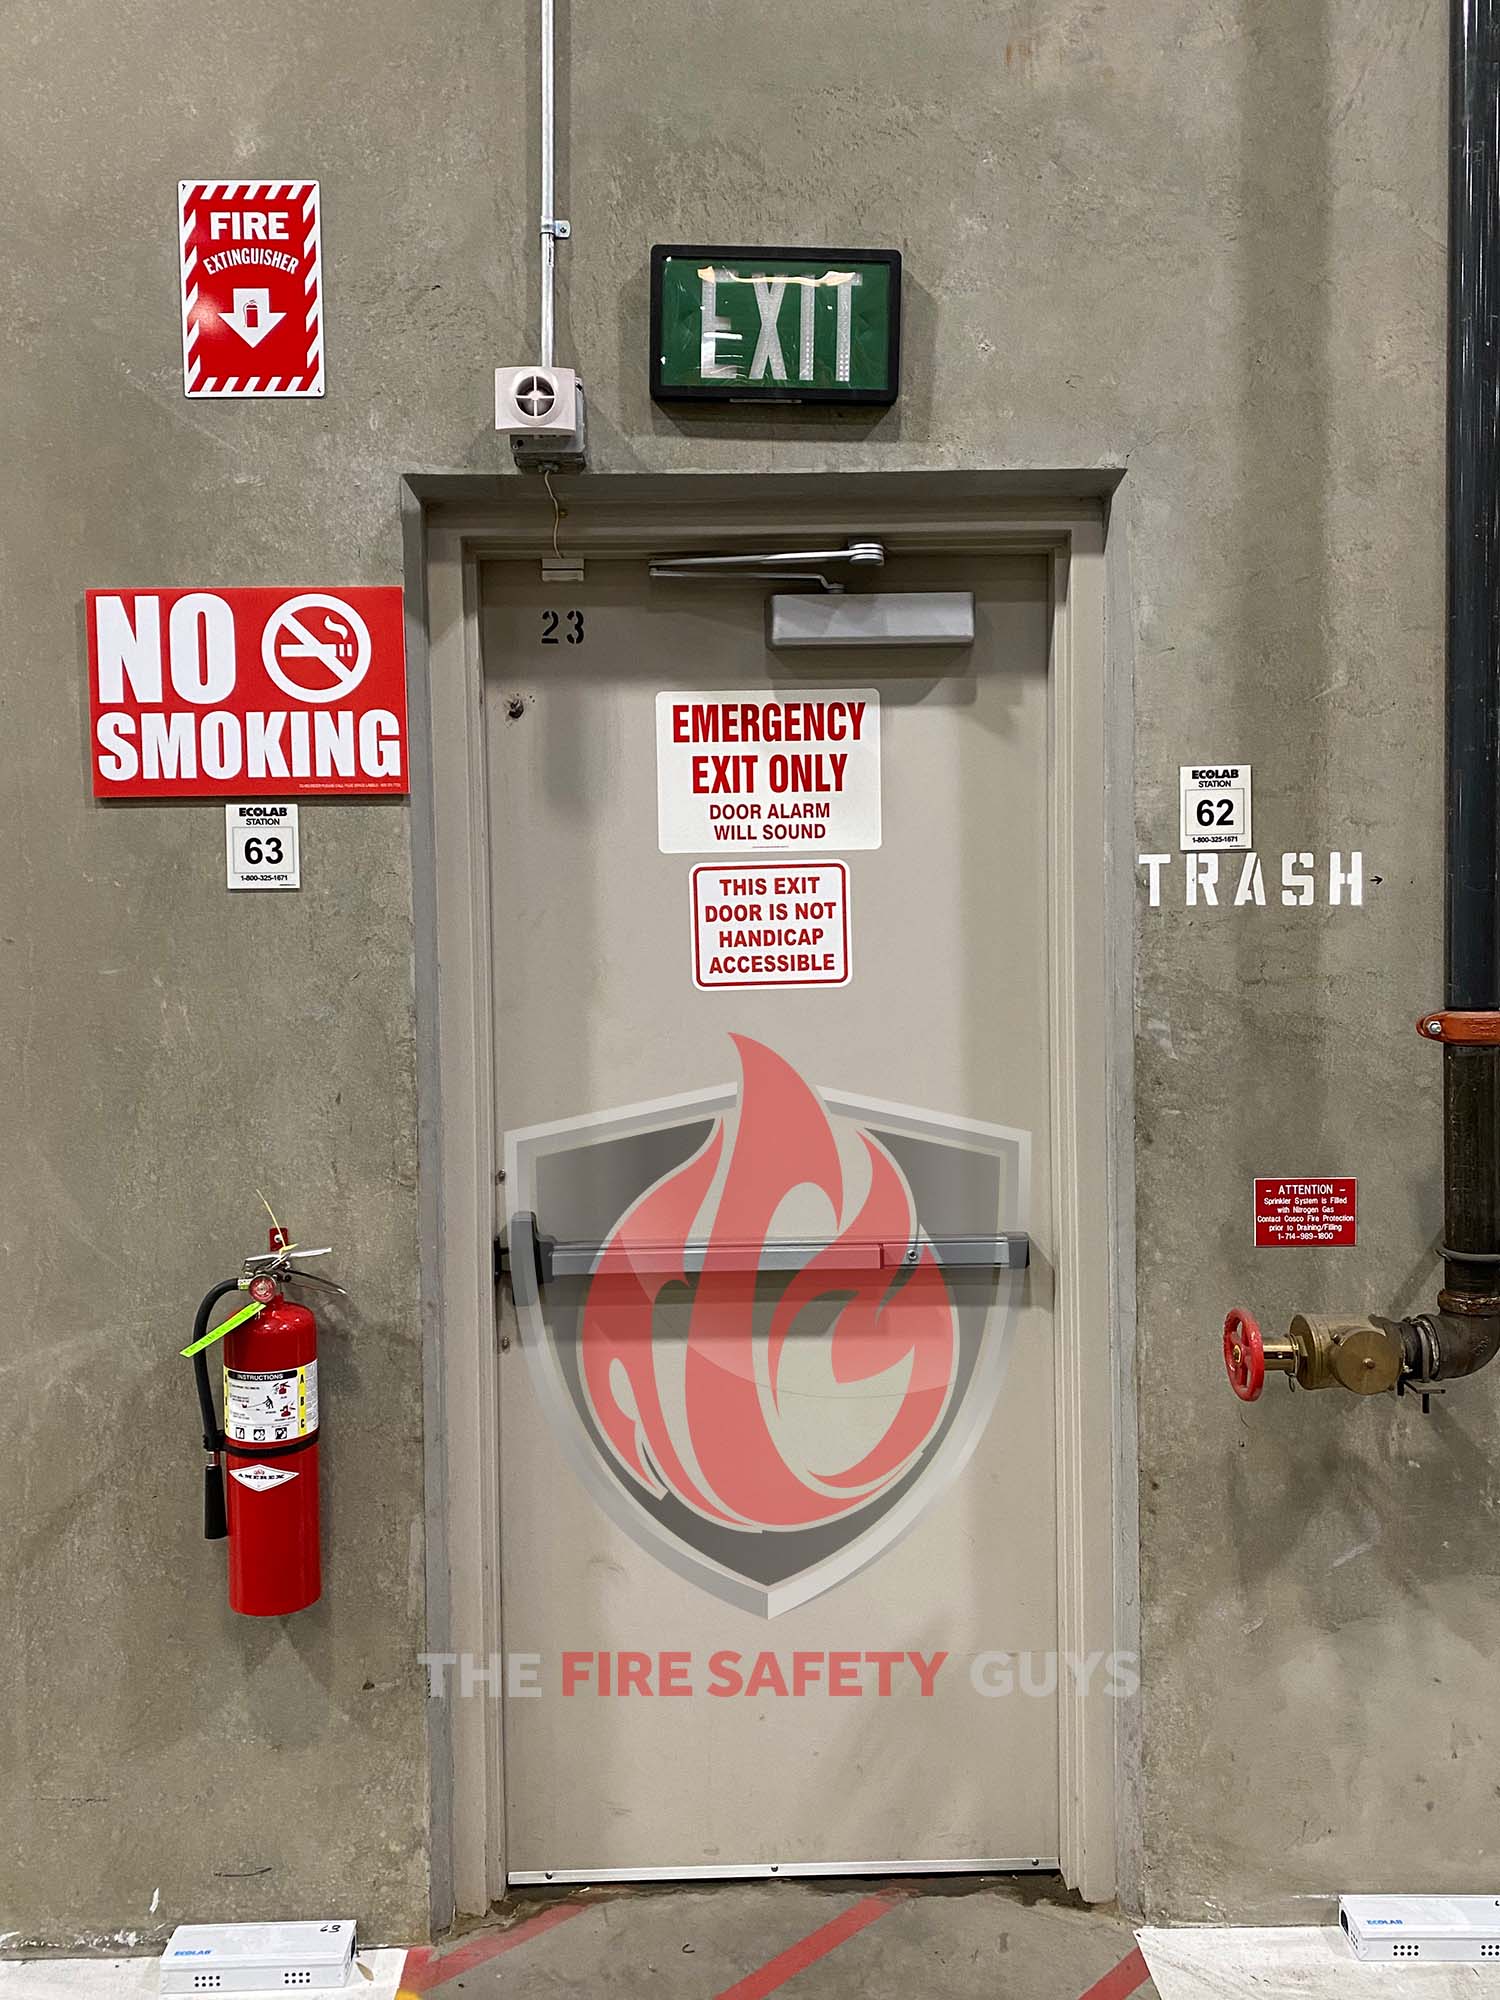 NO SMOKING SIGNS ARE REQUIRED TO PASS HPS INSPECTION